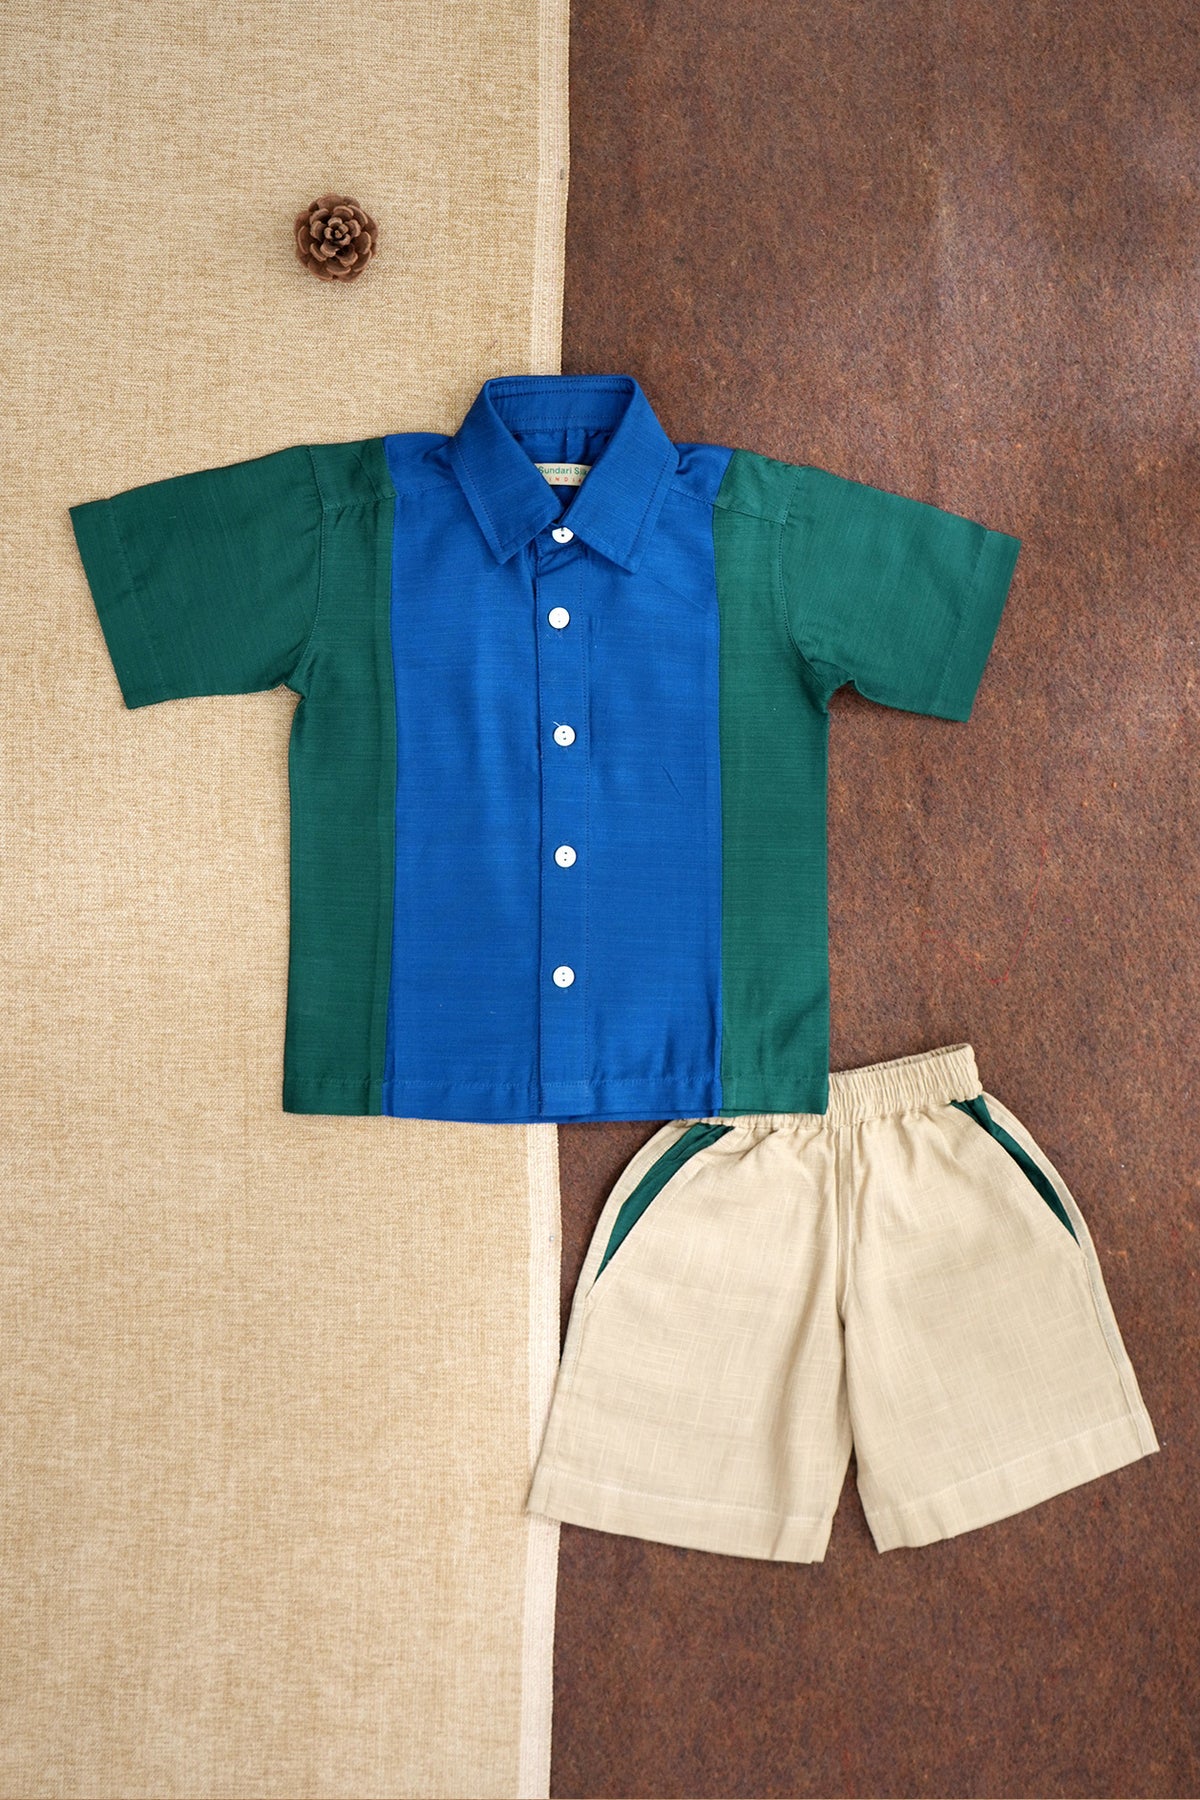 Boys Color Block Shirt With Contrast Side Panel And Shorts With Contrast Detail At The Pockets